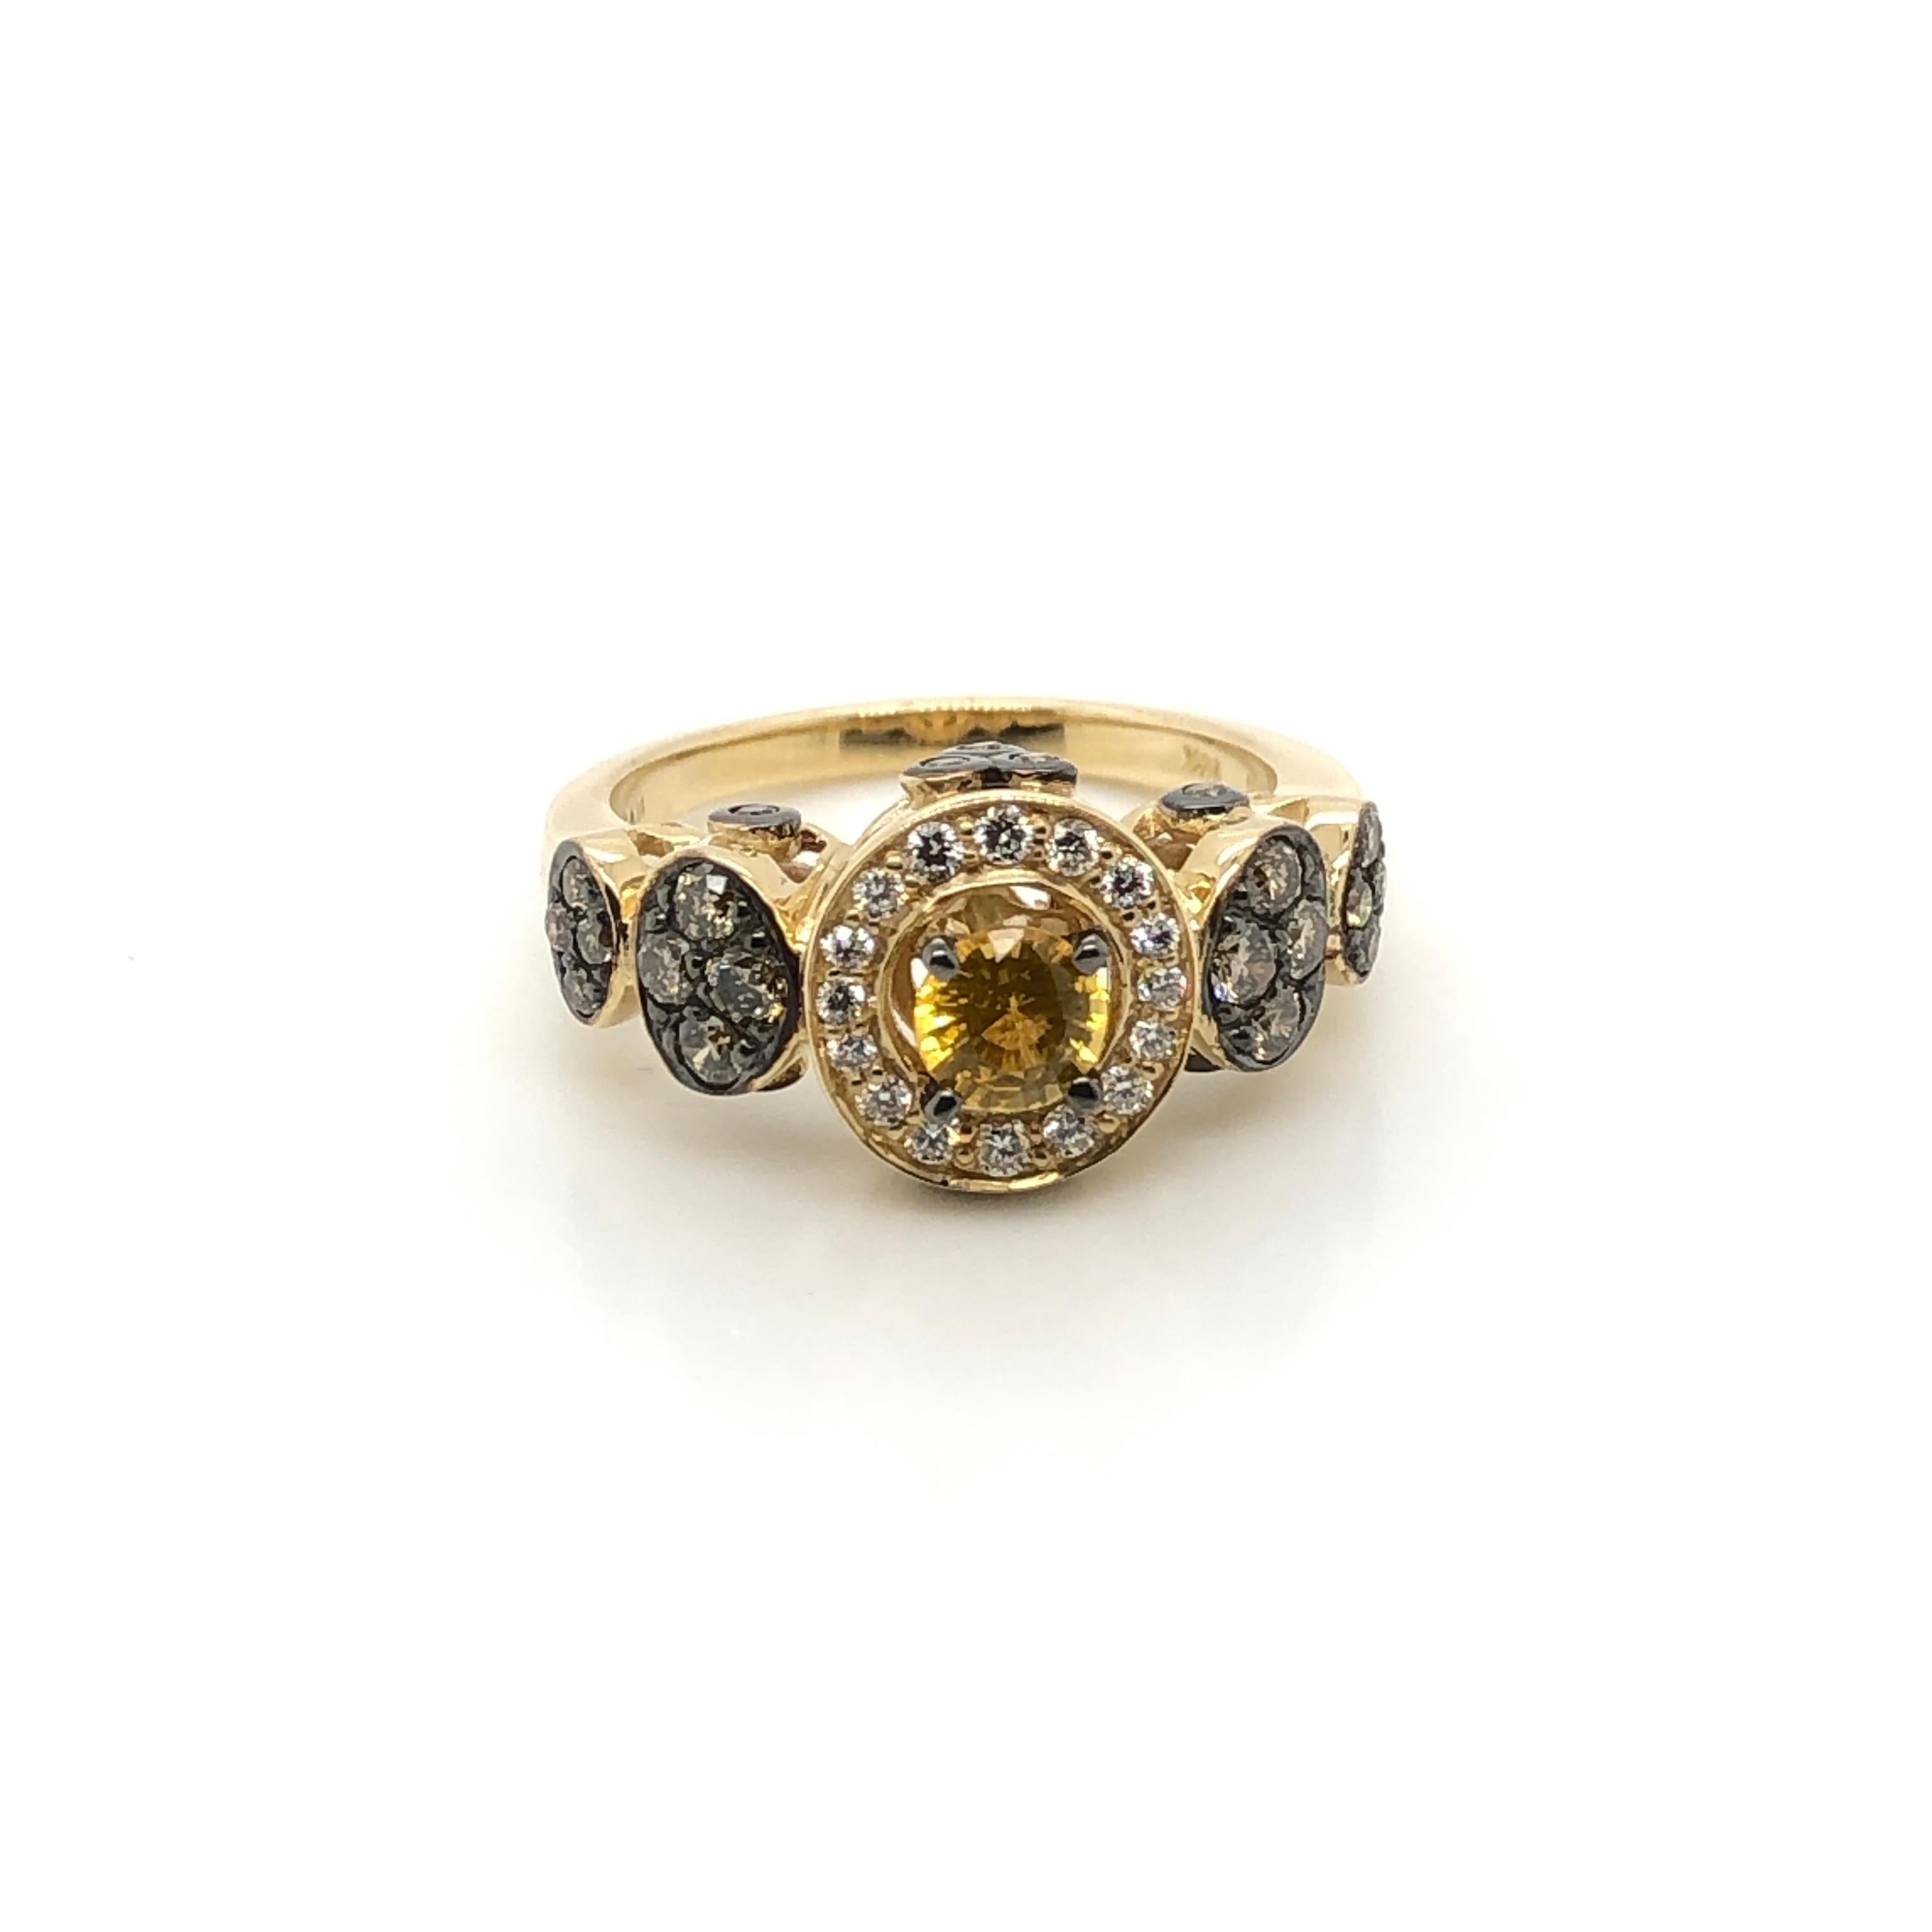 Sweet with sunshine!  This 14k yellow gold Le Vian Chocolatier ring is centered with a 1/2-carat round cut Yellow Sapphire framed within a halo of Vanilla Diamonds (1/6 ct.t.w) with round circles of 1/2 ct t.w. Chocolate Diamonds creating the